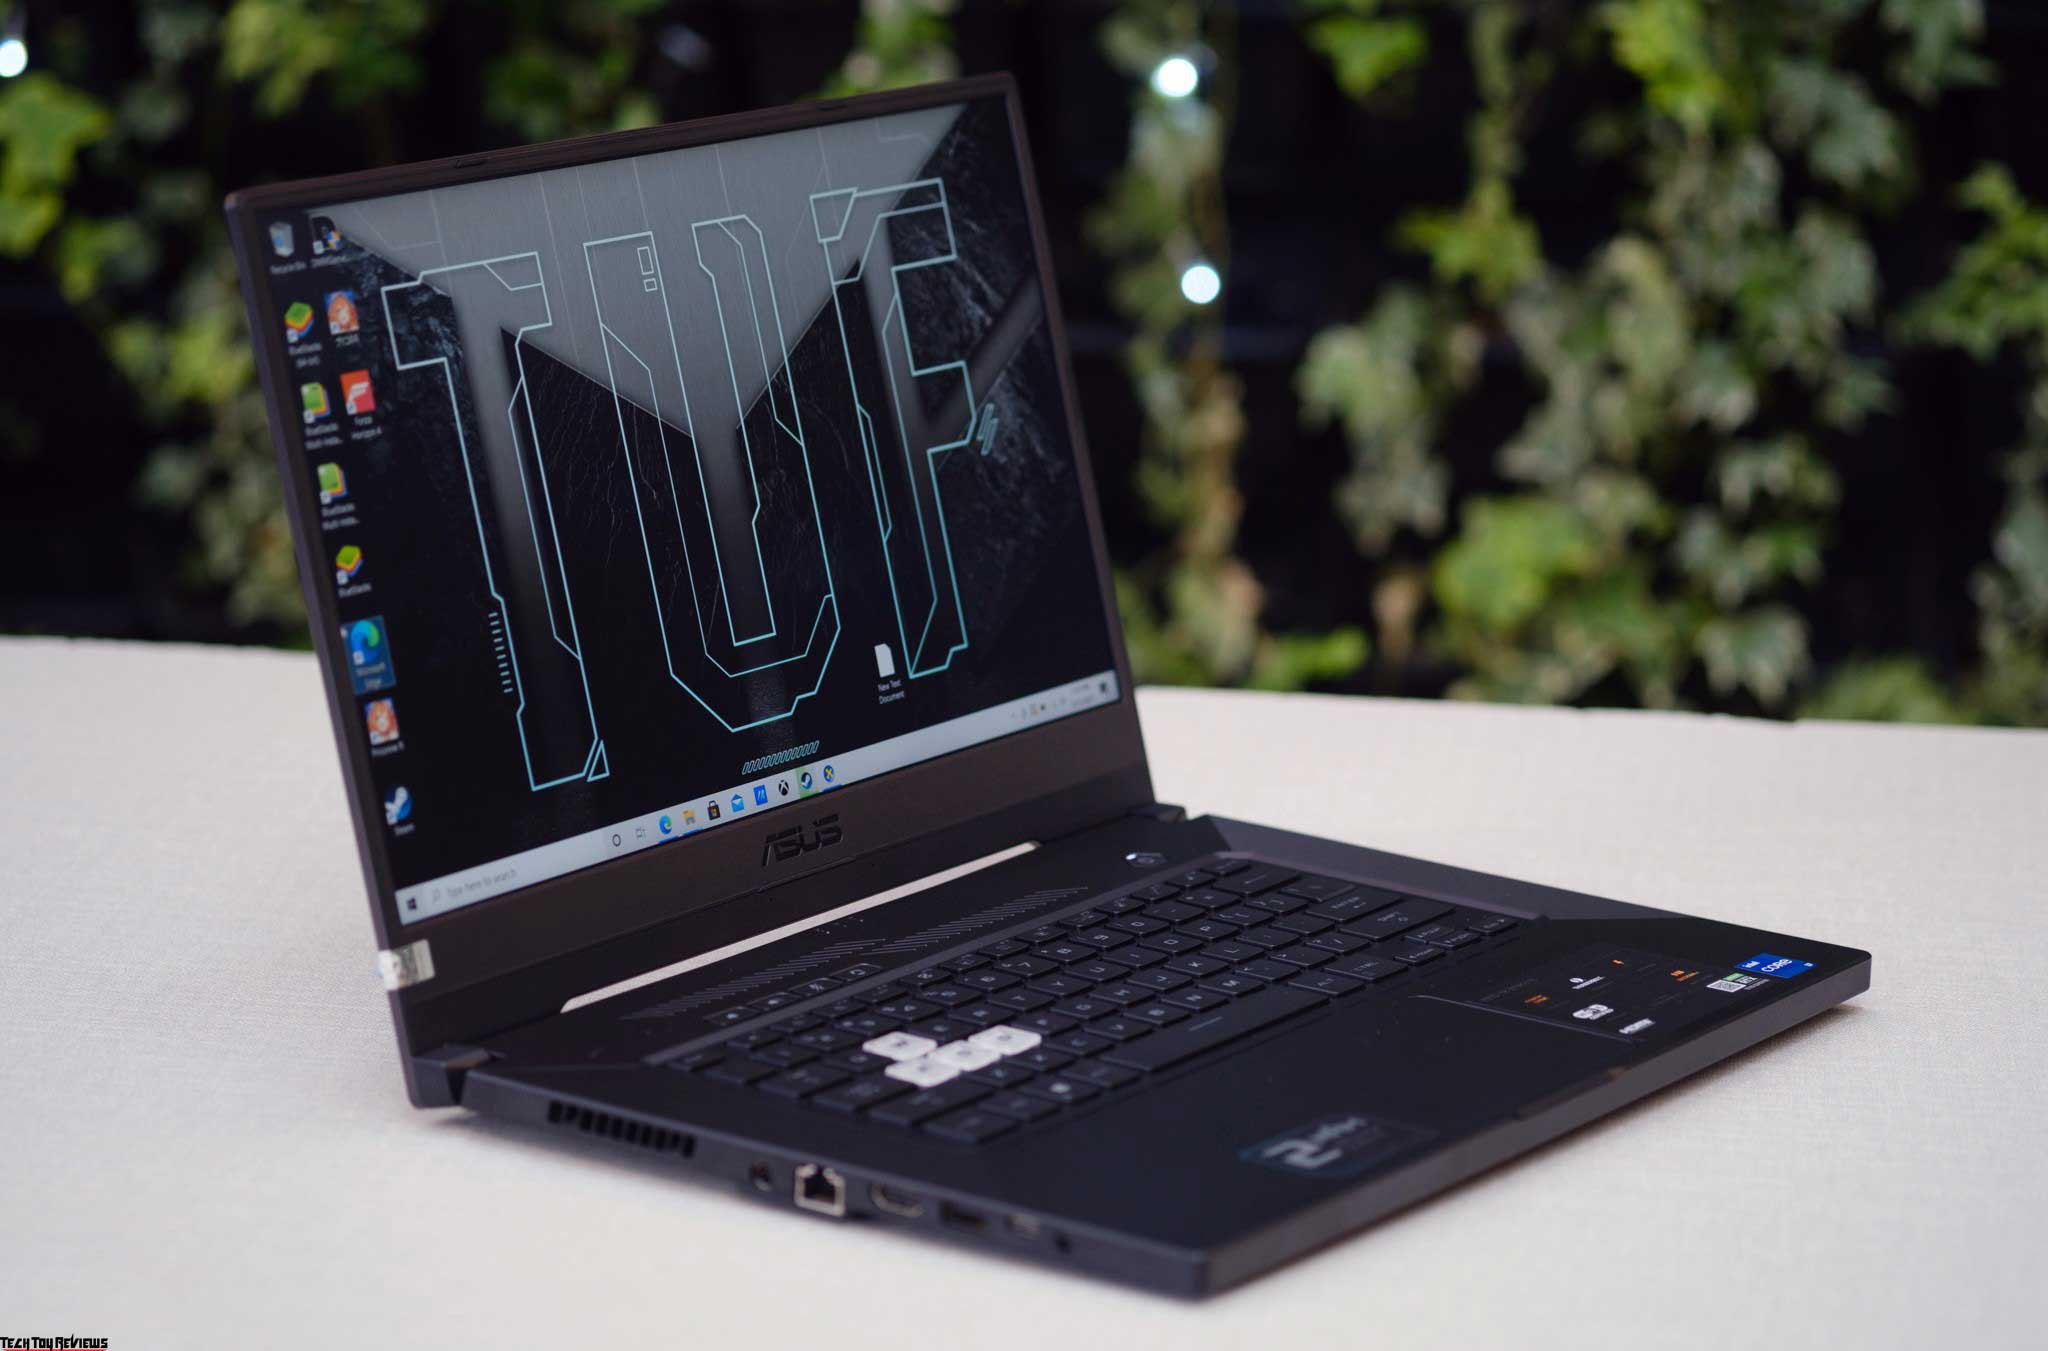 Asus TUF Dash F15 Review: Good Performance, But Questions Remain